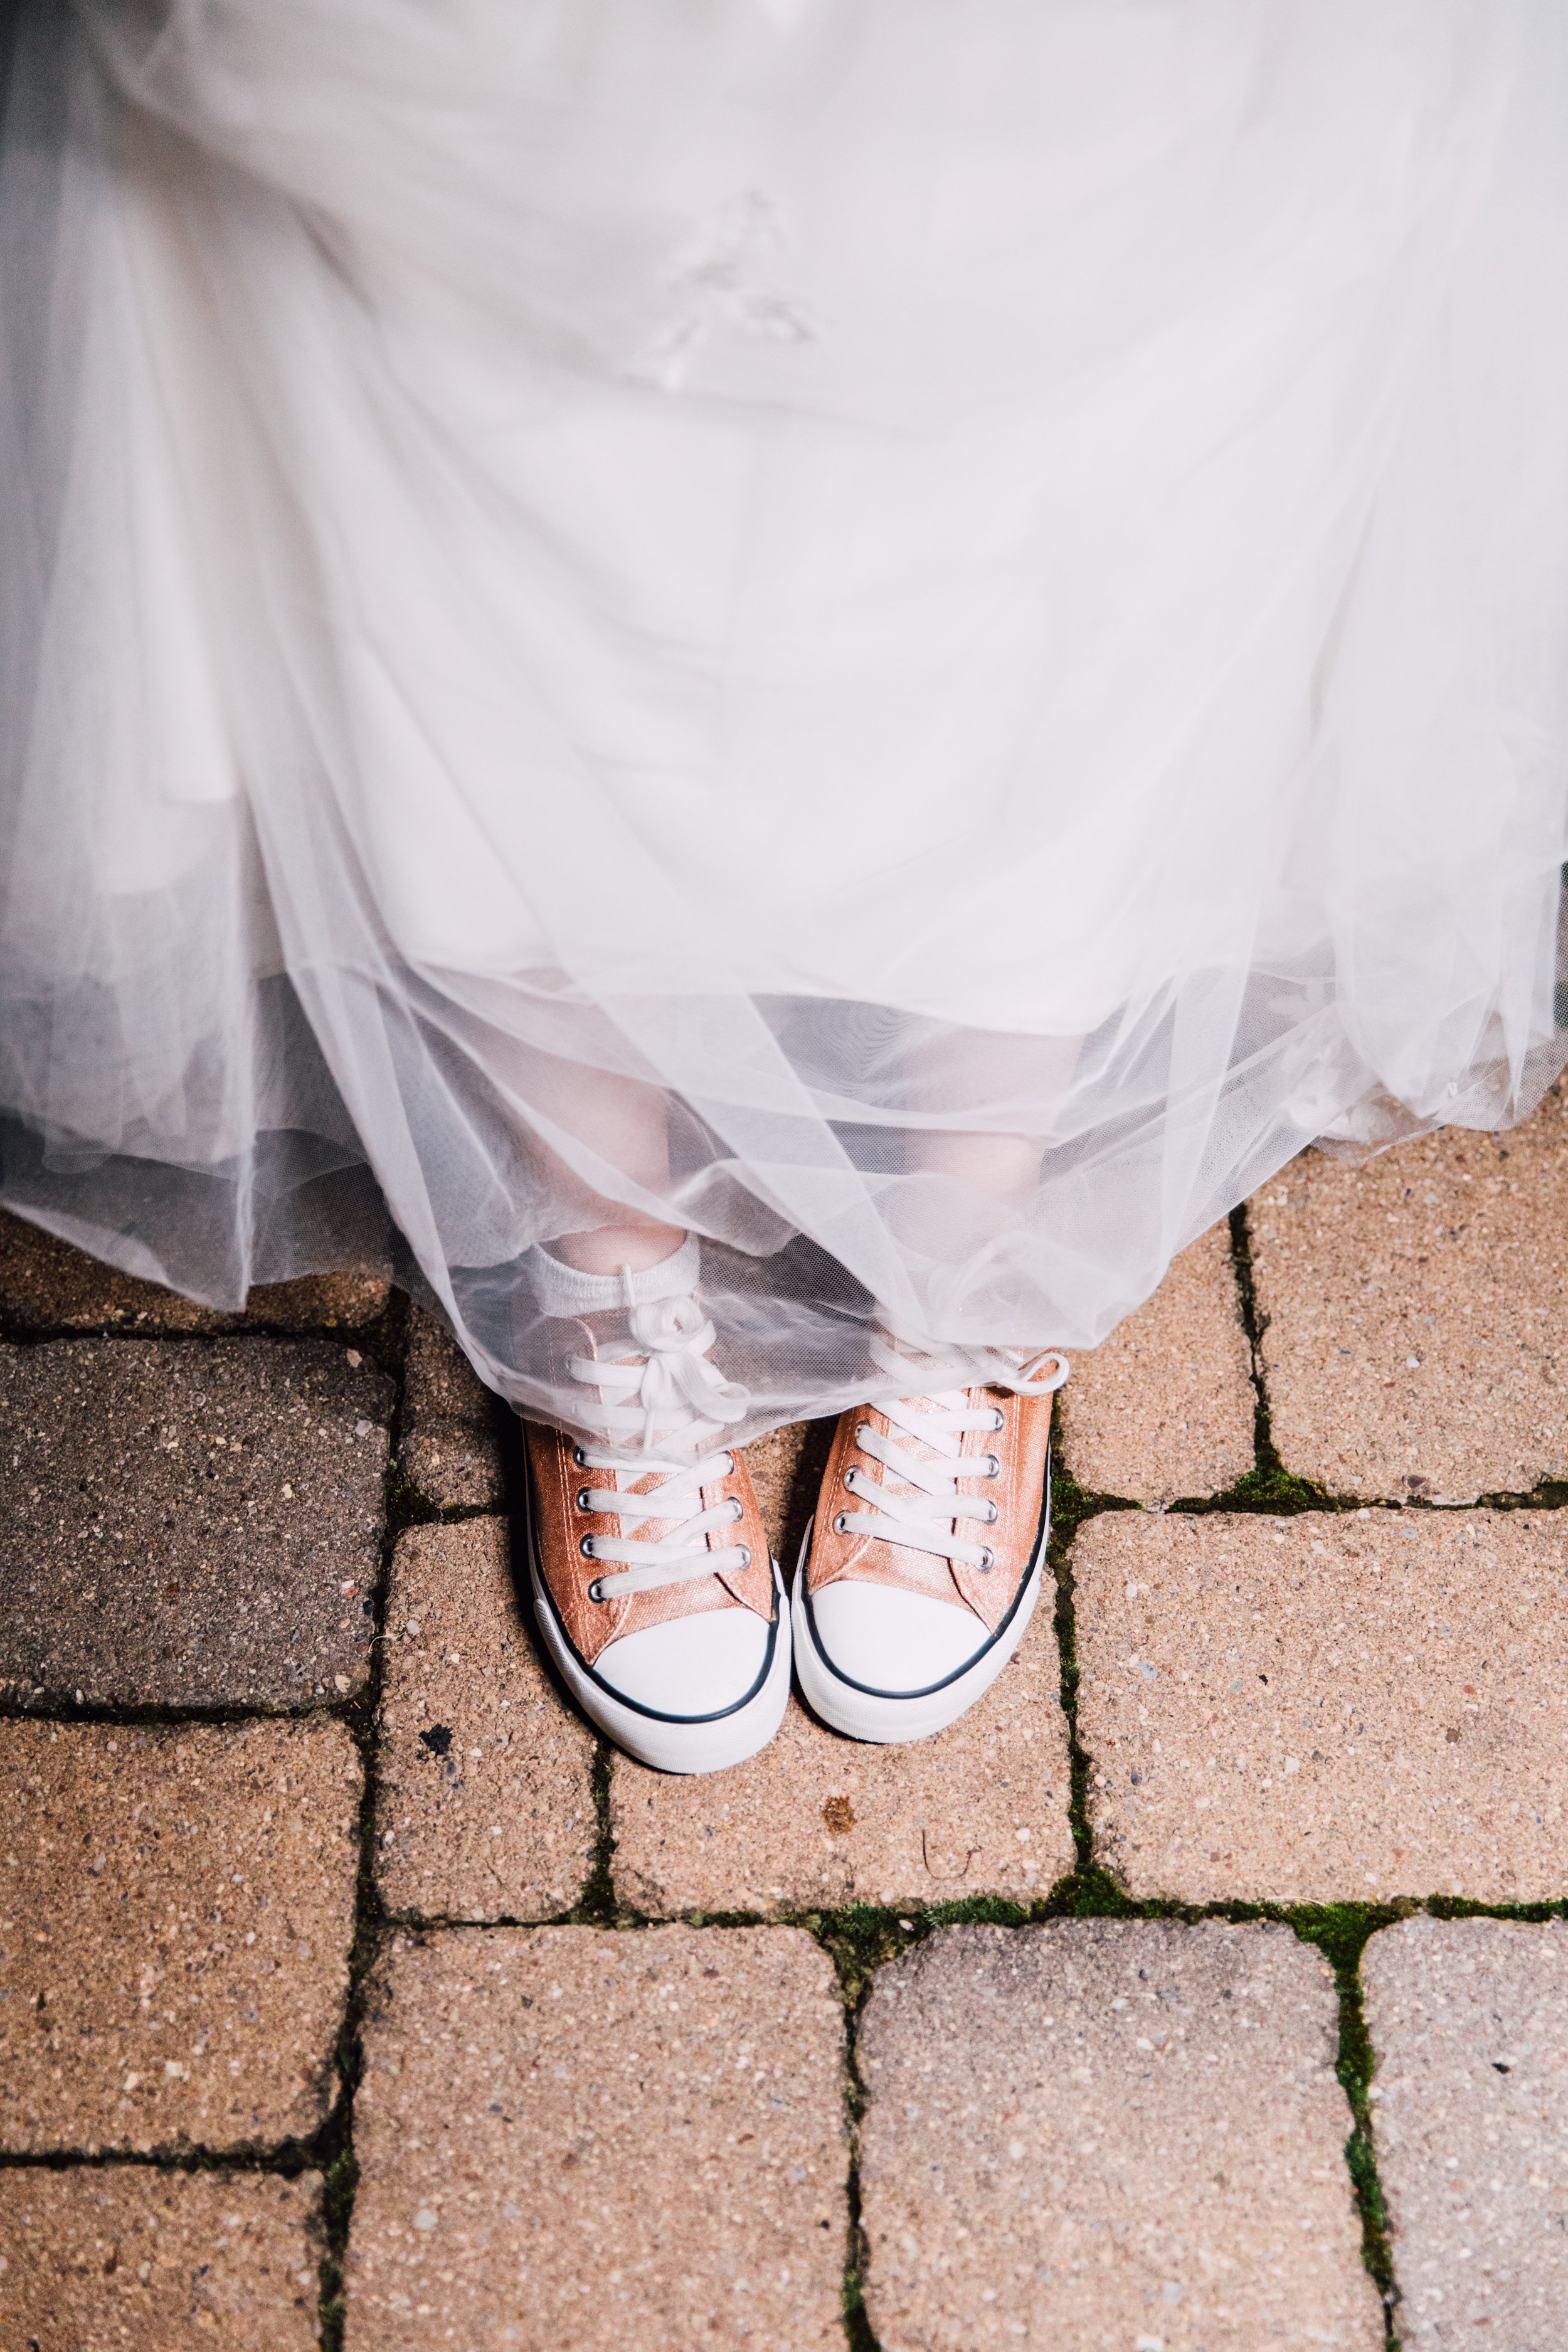  Bride shows off her Chuck Taylor shoes at her wedding reception 